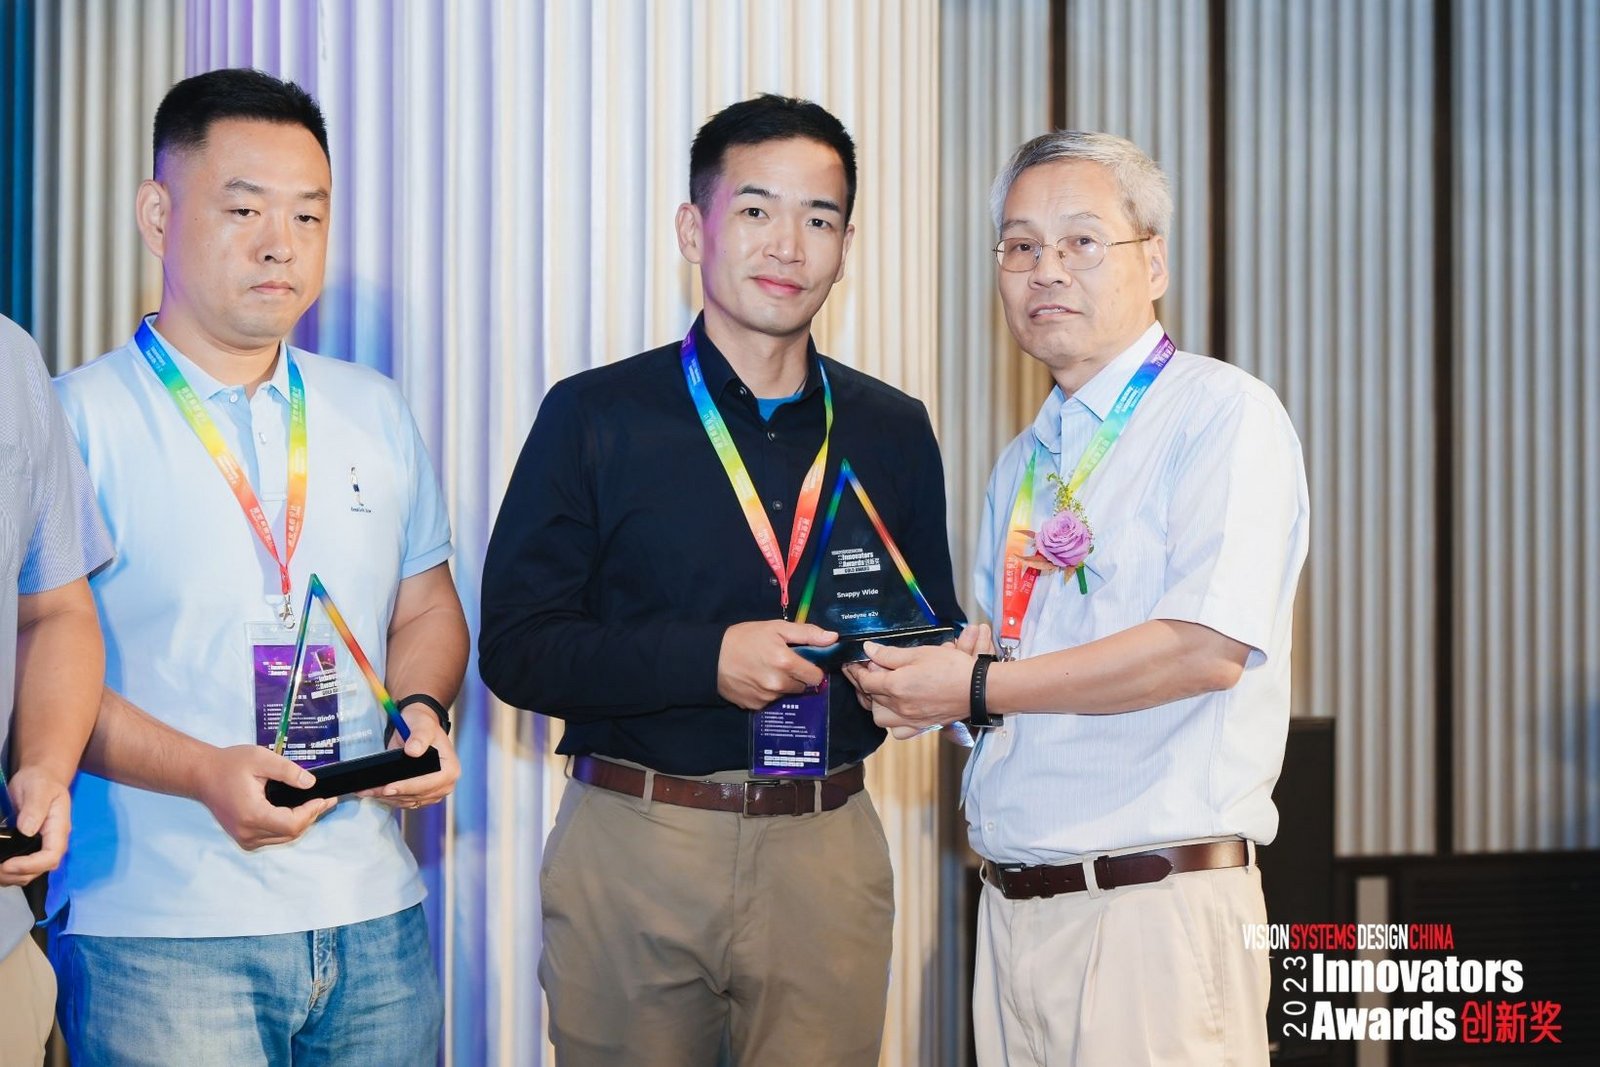 [Translate to Chinese:] At the Vision System Design China Innovators Gold Award Ceremony, Tom Huang, General Manager APAC at Allied Vision, receives the award for Allied Vision (in the middle).